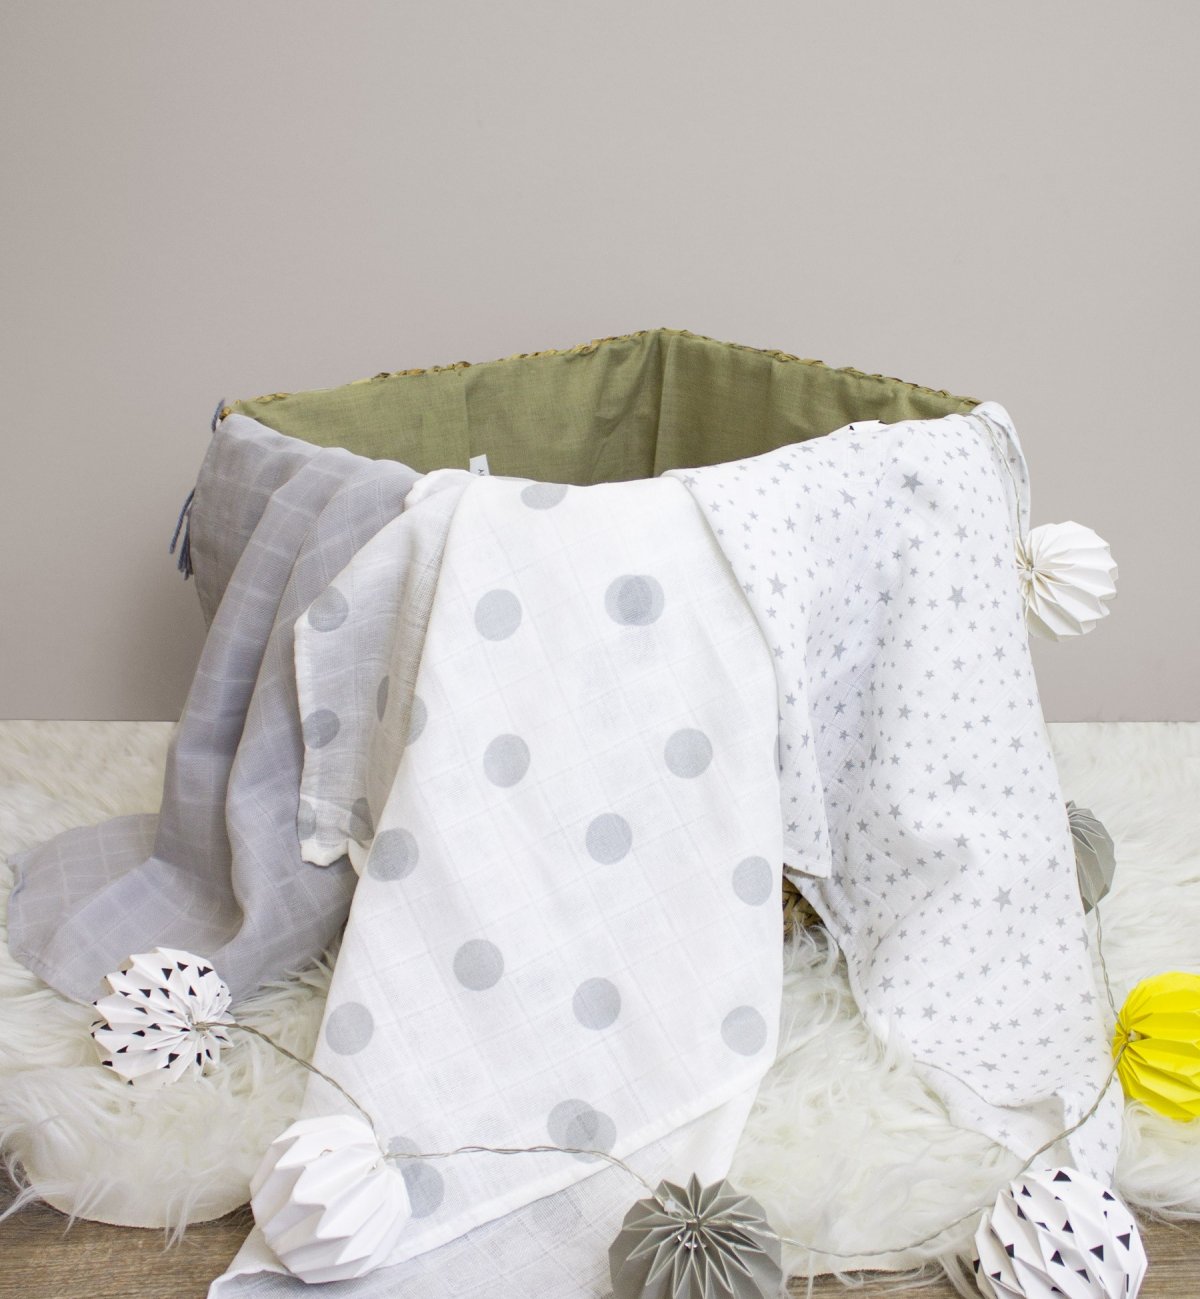 Set of 3 Organic Cotton diapers with polka dot pattern 70x70 cm